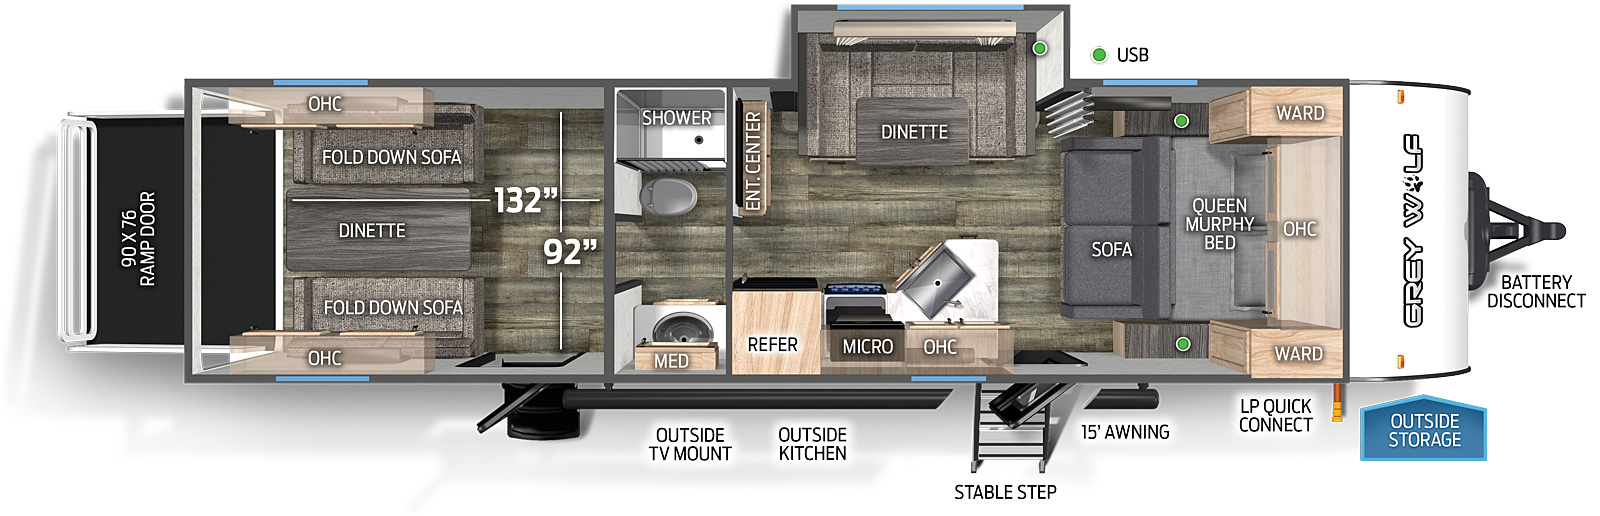 The 27RRBL has one slide out, a rear ramp door, and two entry doors. Exterior features include an outside TV mount, outside kitchen, front stable step entry, 15 foot awning, LP quick connect, outside storage, and battery disconnect. Interior layout front to back: queen murphy bed and sofa with overhead cabinet and wardrobes on each side; off-door side u-dinette slide out; door side entry, peninsula kitchen countertop with sink wraps to door side with overhead cabinet, microwave, cooktop stove and refrigerator; entertainment center along inner wall; split full bathroom with shower and toilet on off-door side, and sink with medicine cabinet on door side; rear cargo area with second entry door, and opposing wall fold down sofas with overhead cabinets, and dinette table. Cargo area measurements: 132 inches from the rear of the trailer to the bathroom wall; 92 inches from the off-door side wall to the door side wall; 90 inch by 76 inch rear ramp door.